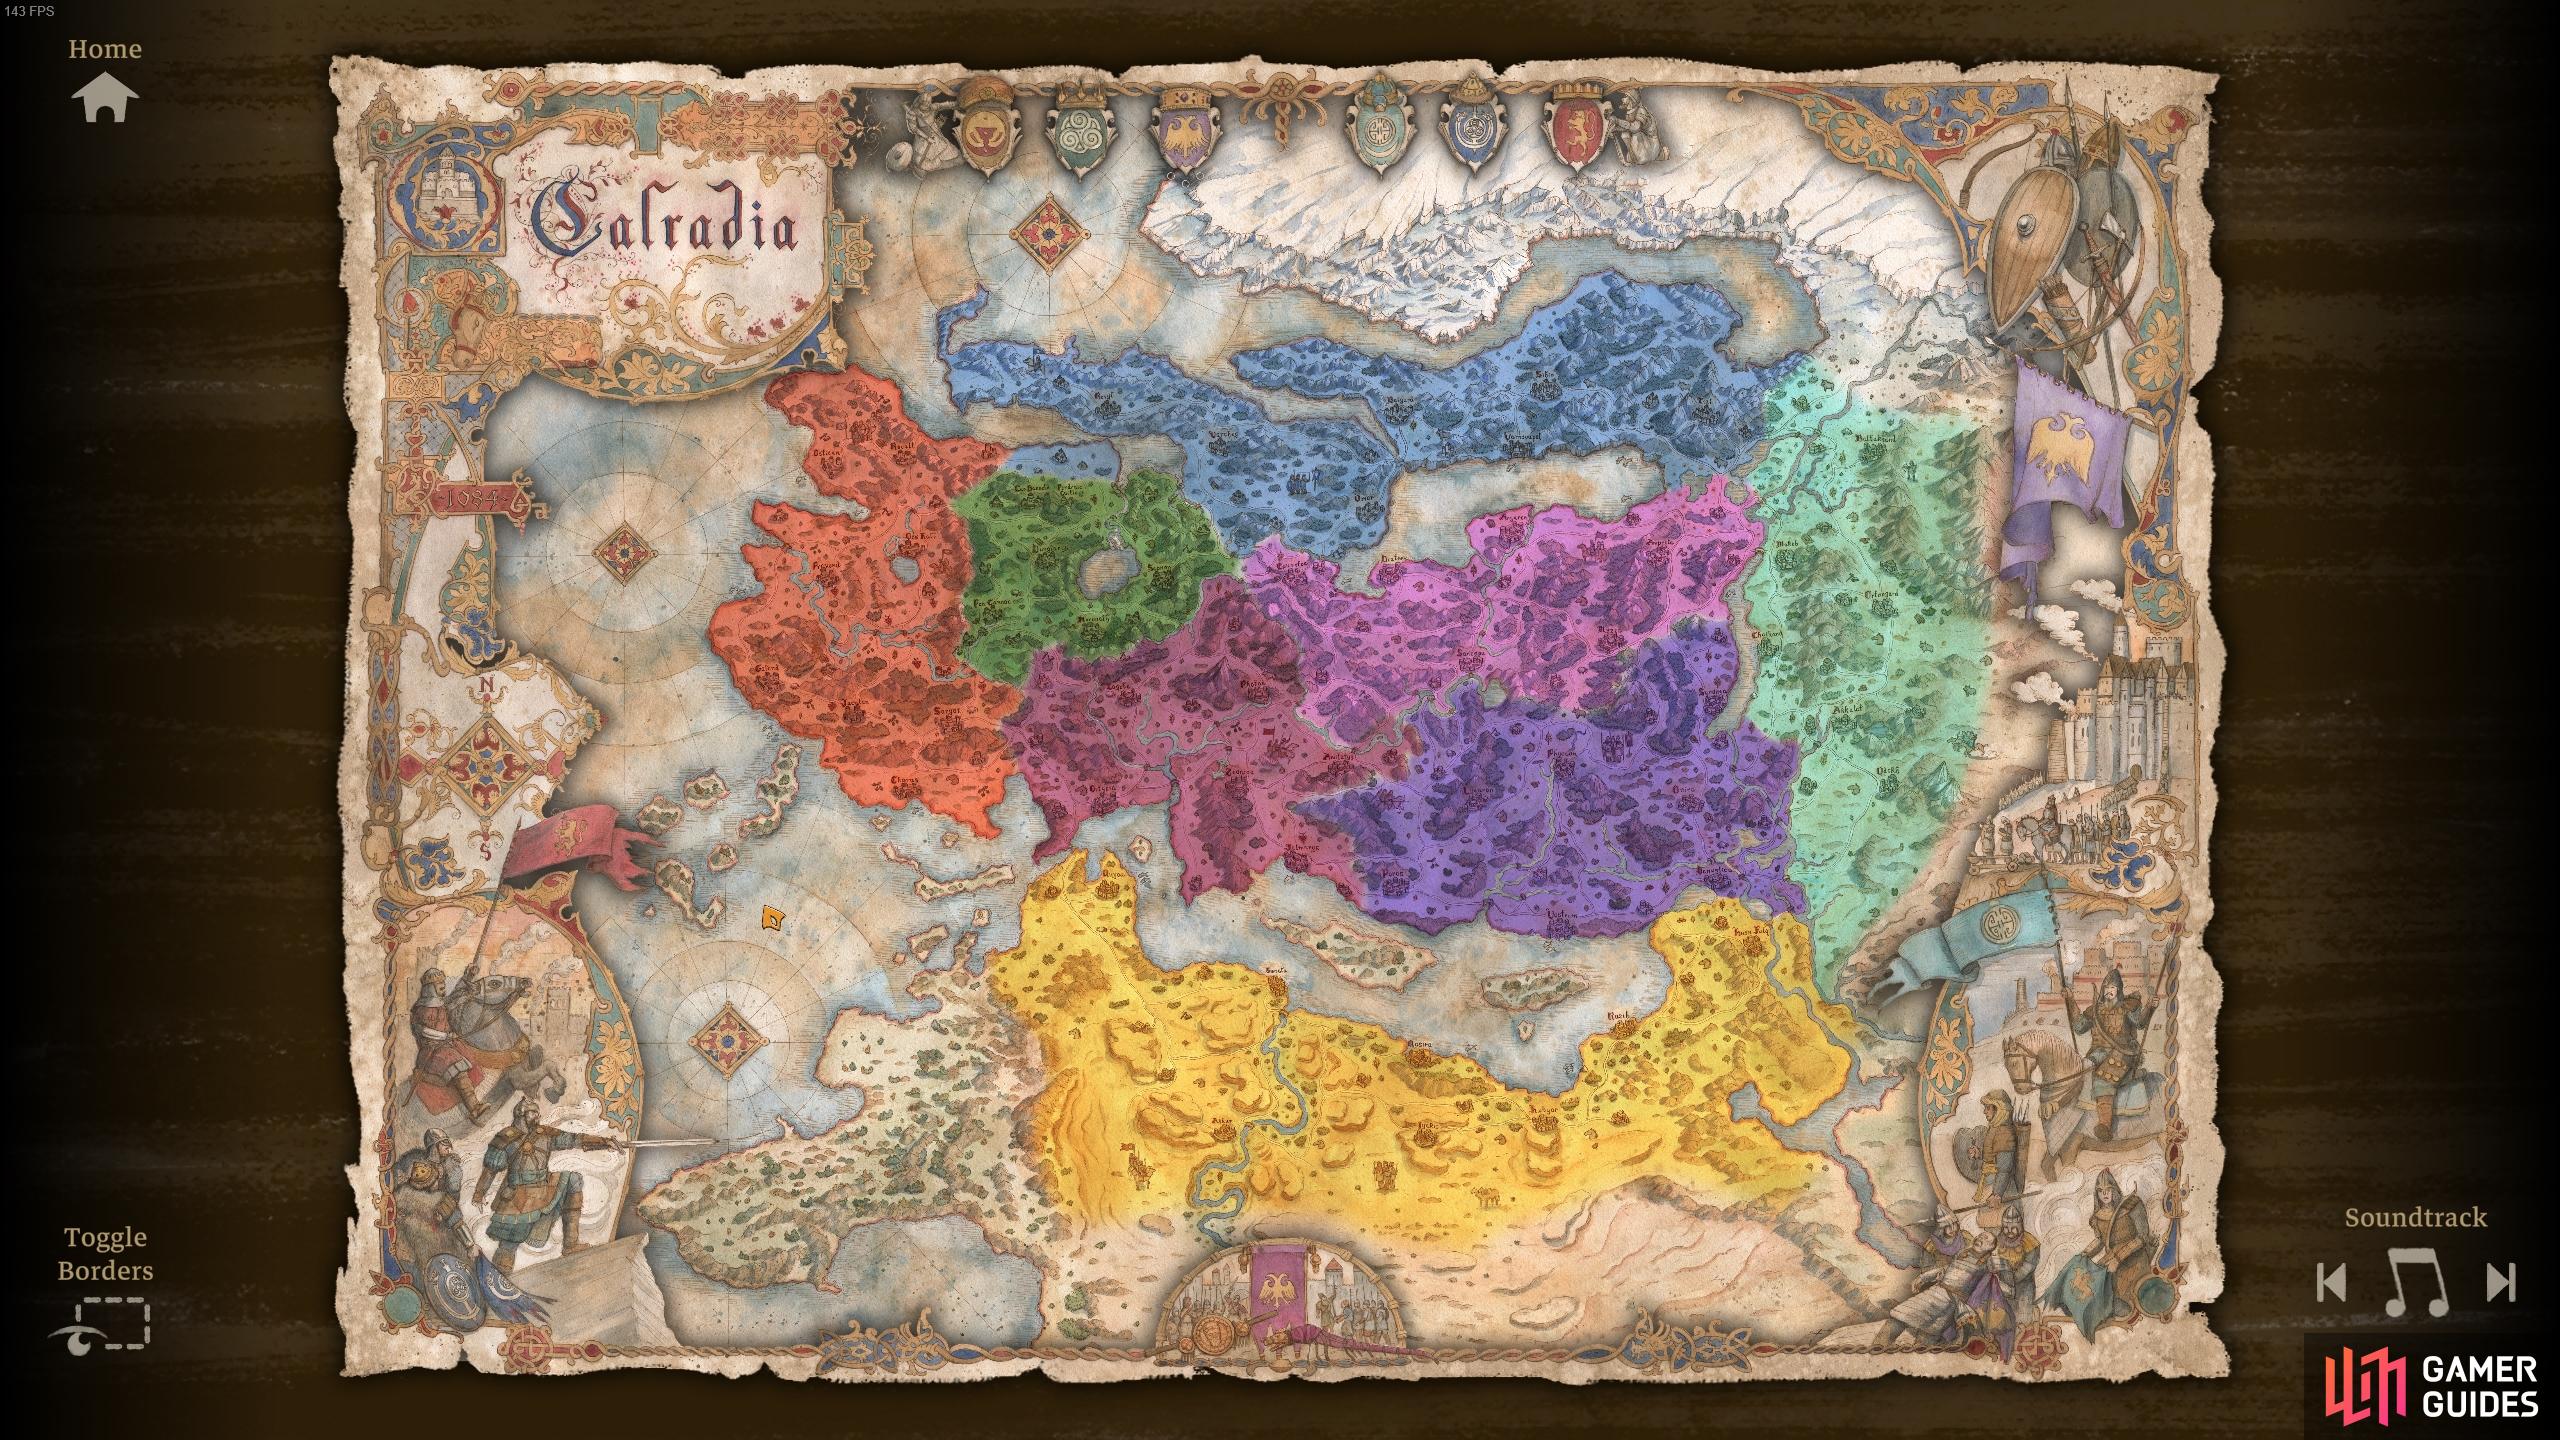 You can see the map with the faction boundaries defined.